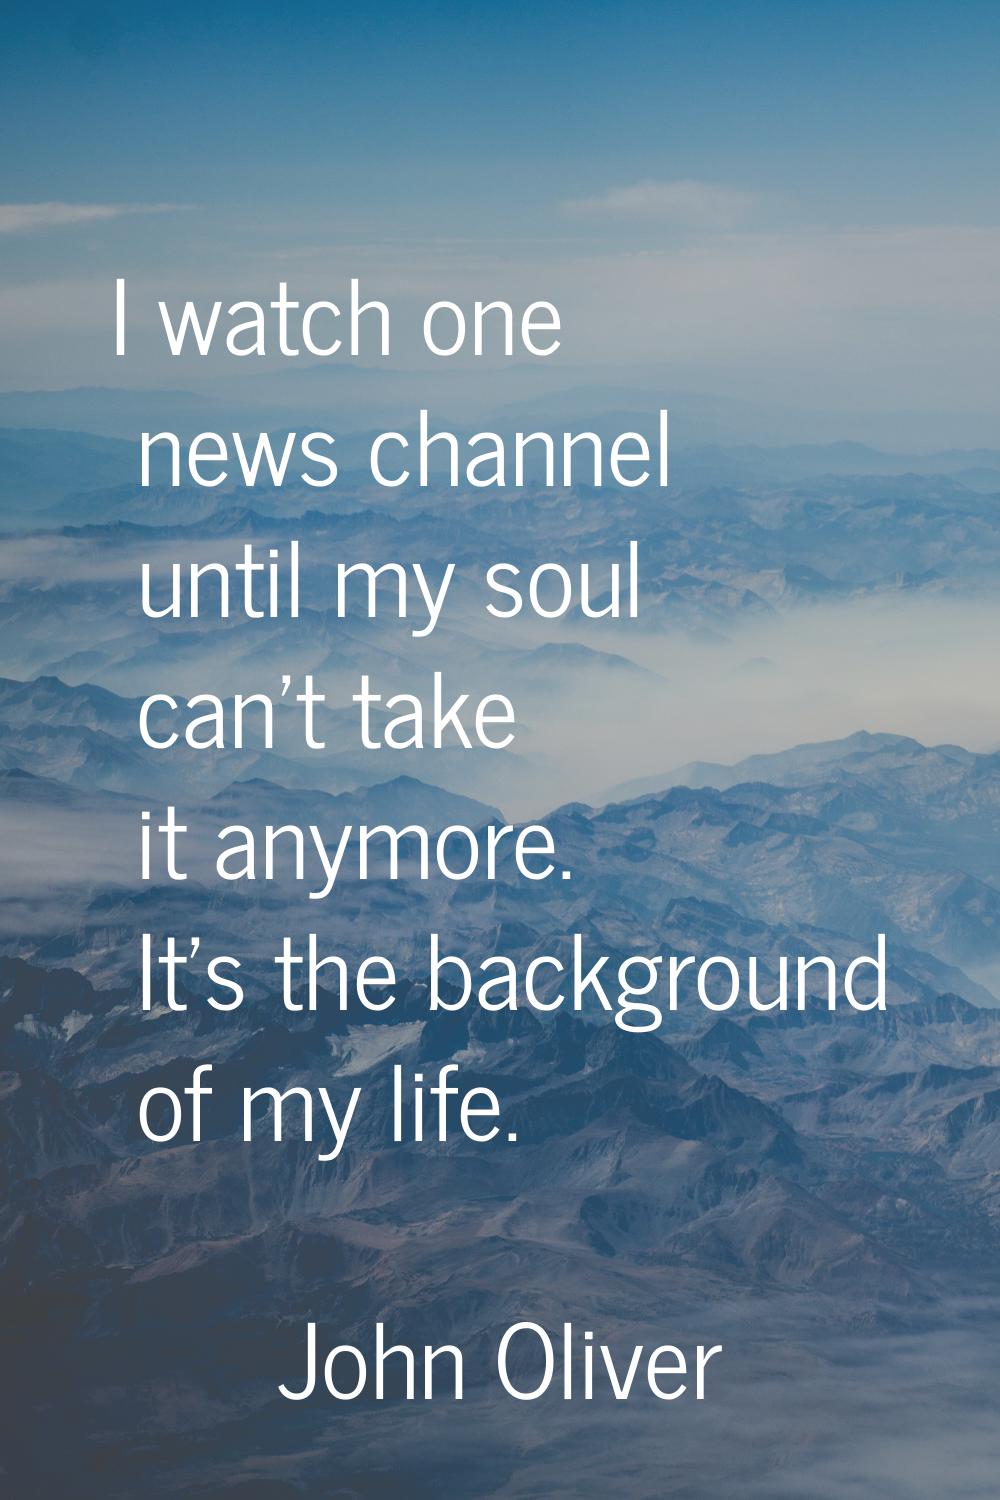 I watch one news channel until my soul can't take it anymore. It's the background of my life.